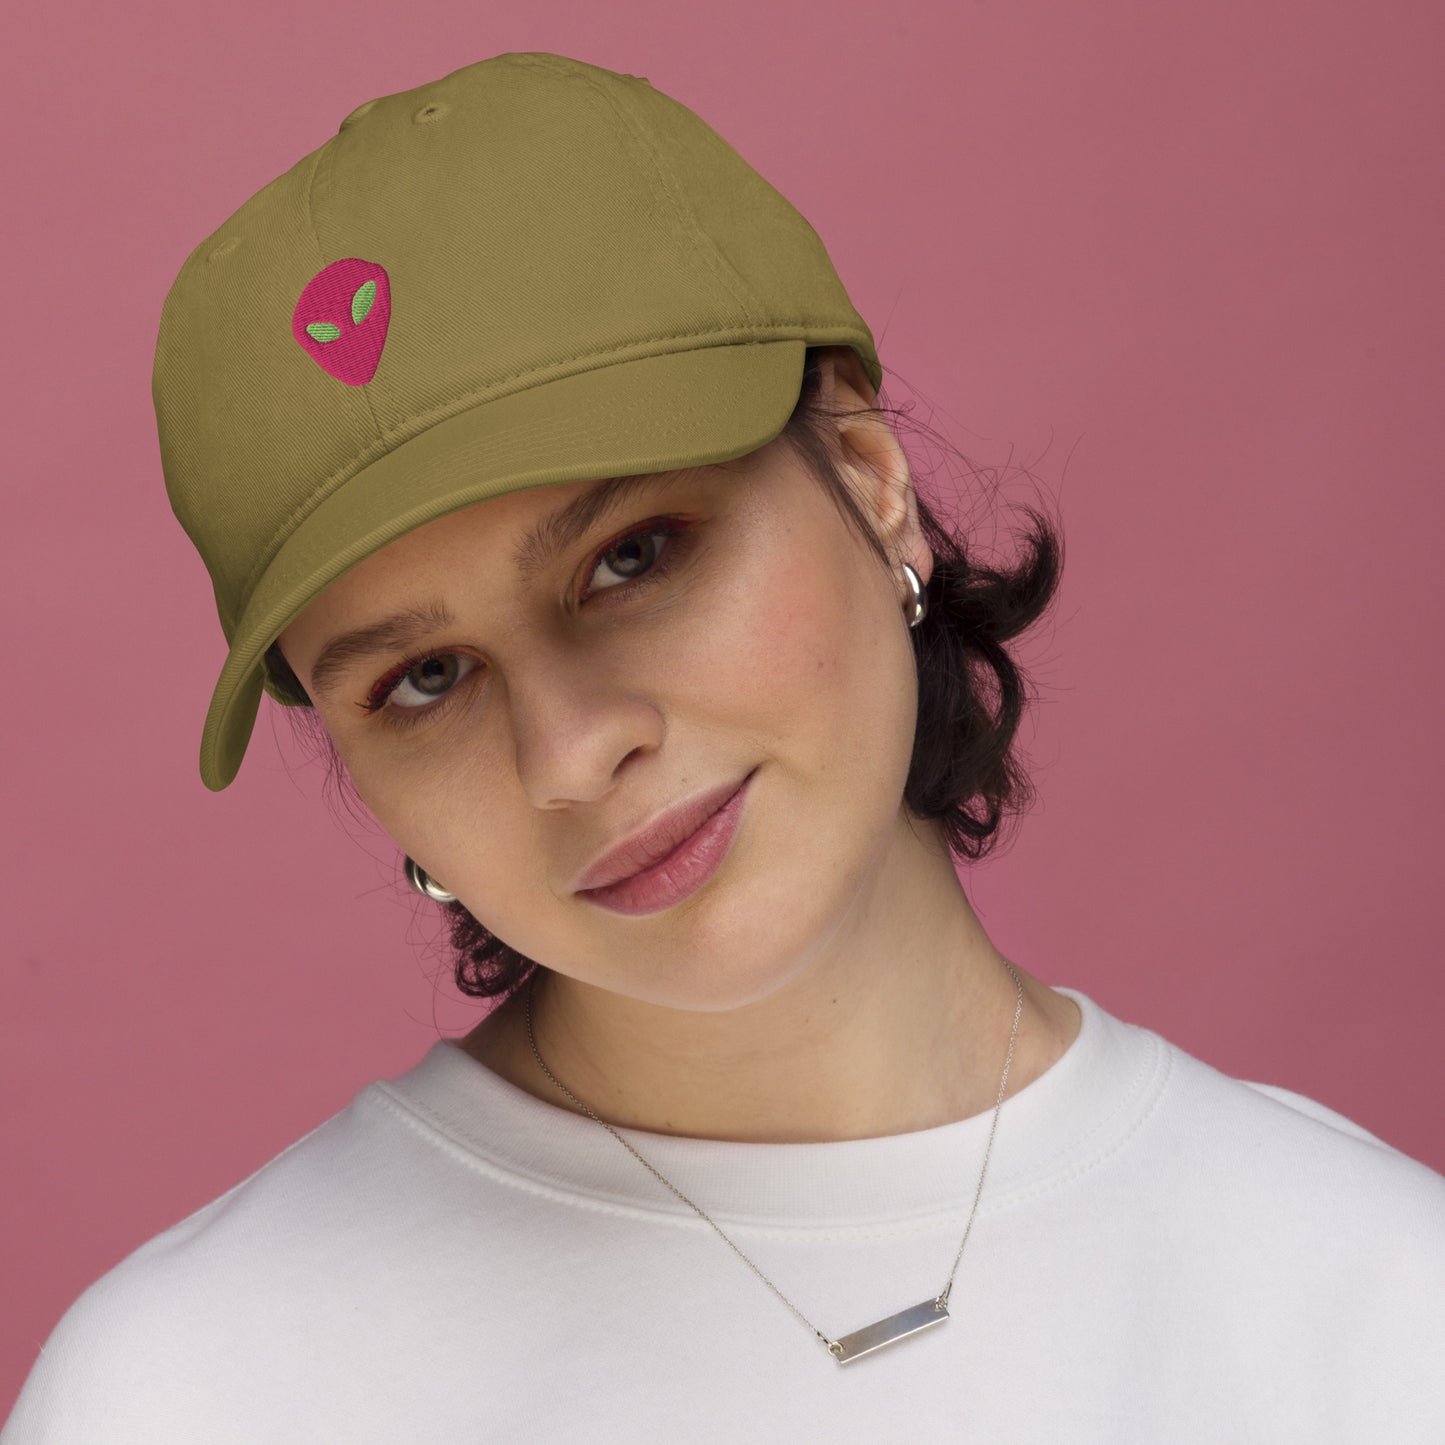 Pink Alien I thought you looked familiar Organic Cotton Dad Hat